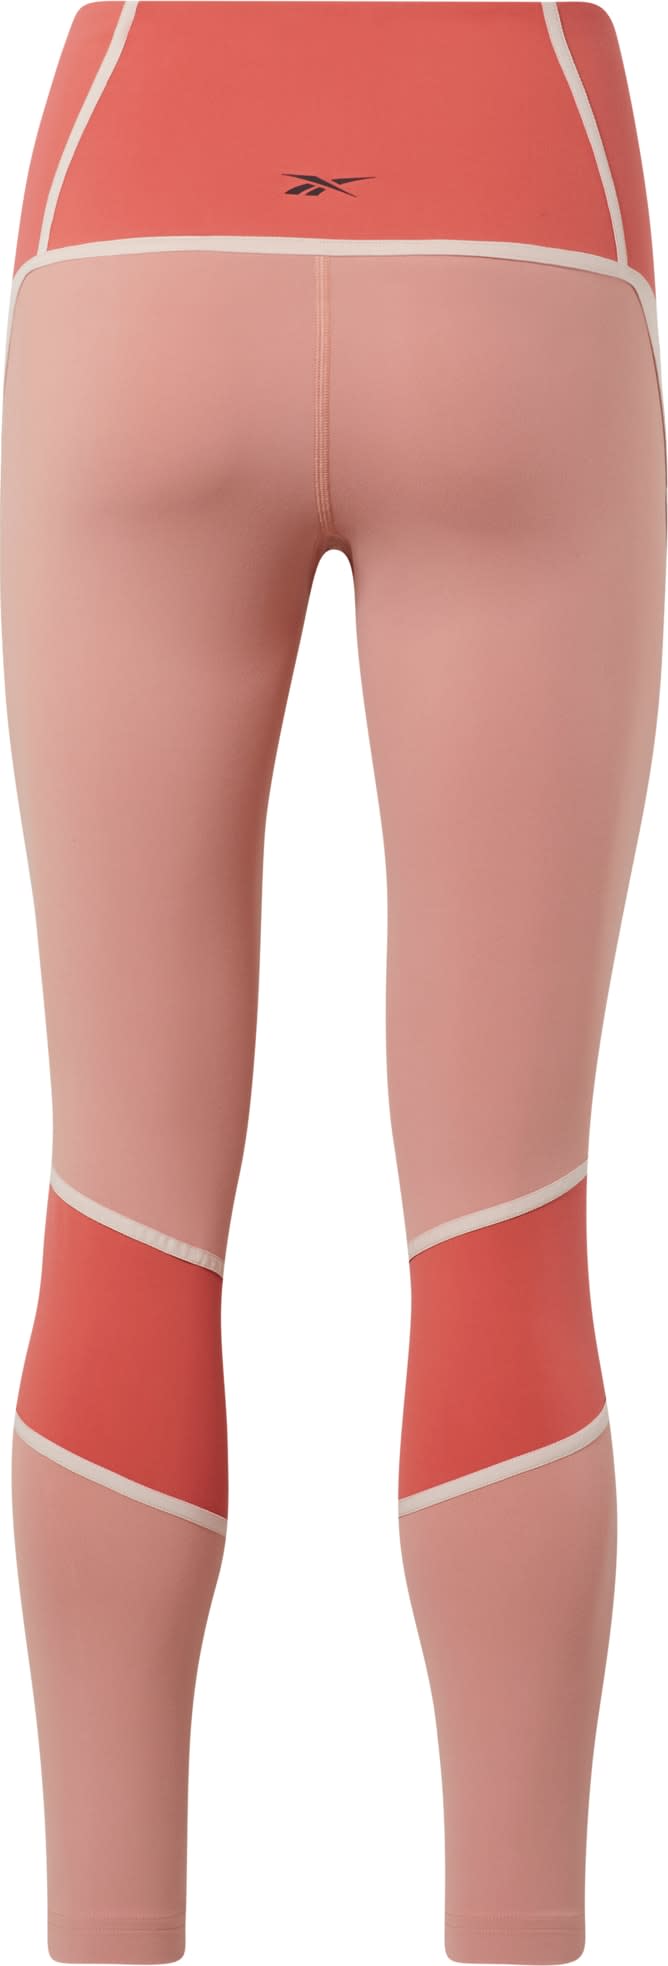 Women's Lux High-Waisted Colorblock Tights Cancor, Buy Women's Lux High- Waisted Colorblock Tights Cancor here